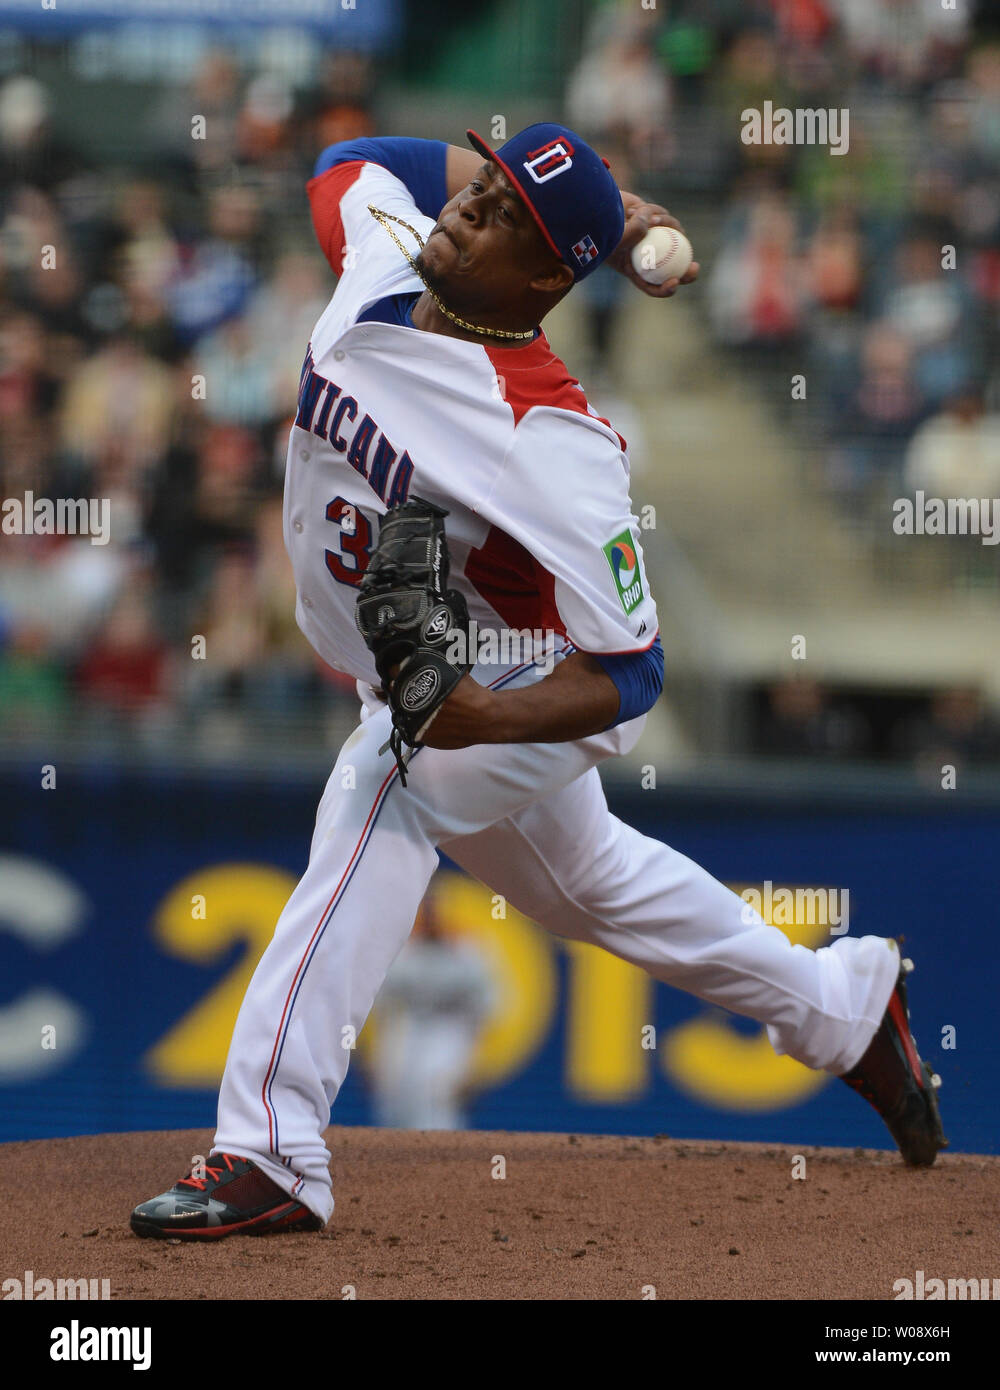 Edinson Volquez of Dominican Republic throws against the Netherlands in the first inning of the semi finals of the World Baseball Classic at AT&T Park in San Francisco on March 18, 2013.    UPI/Terry Schmitt Stock Photo